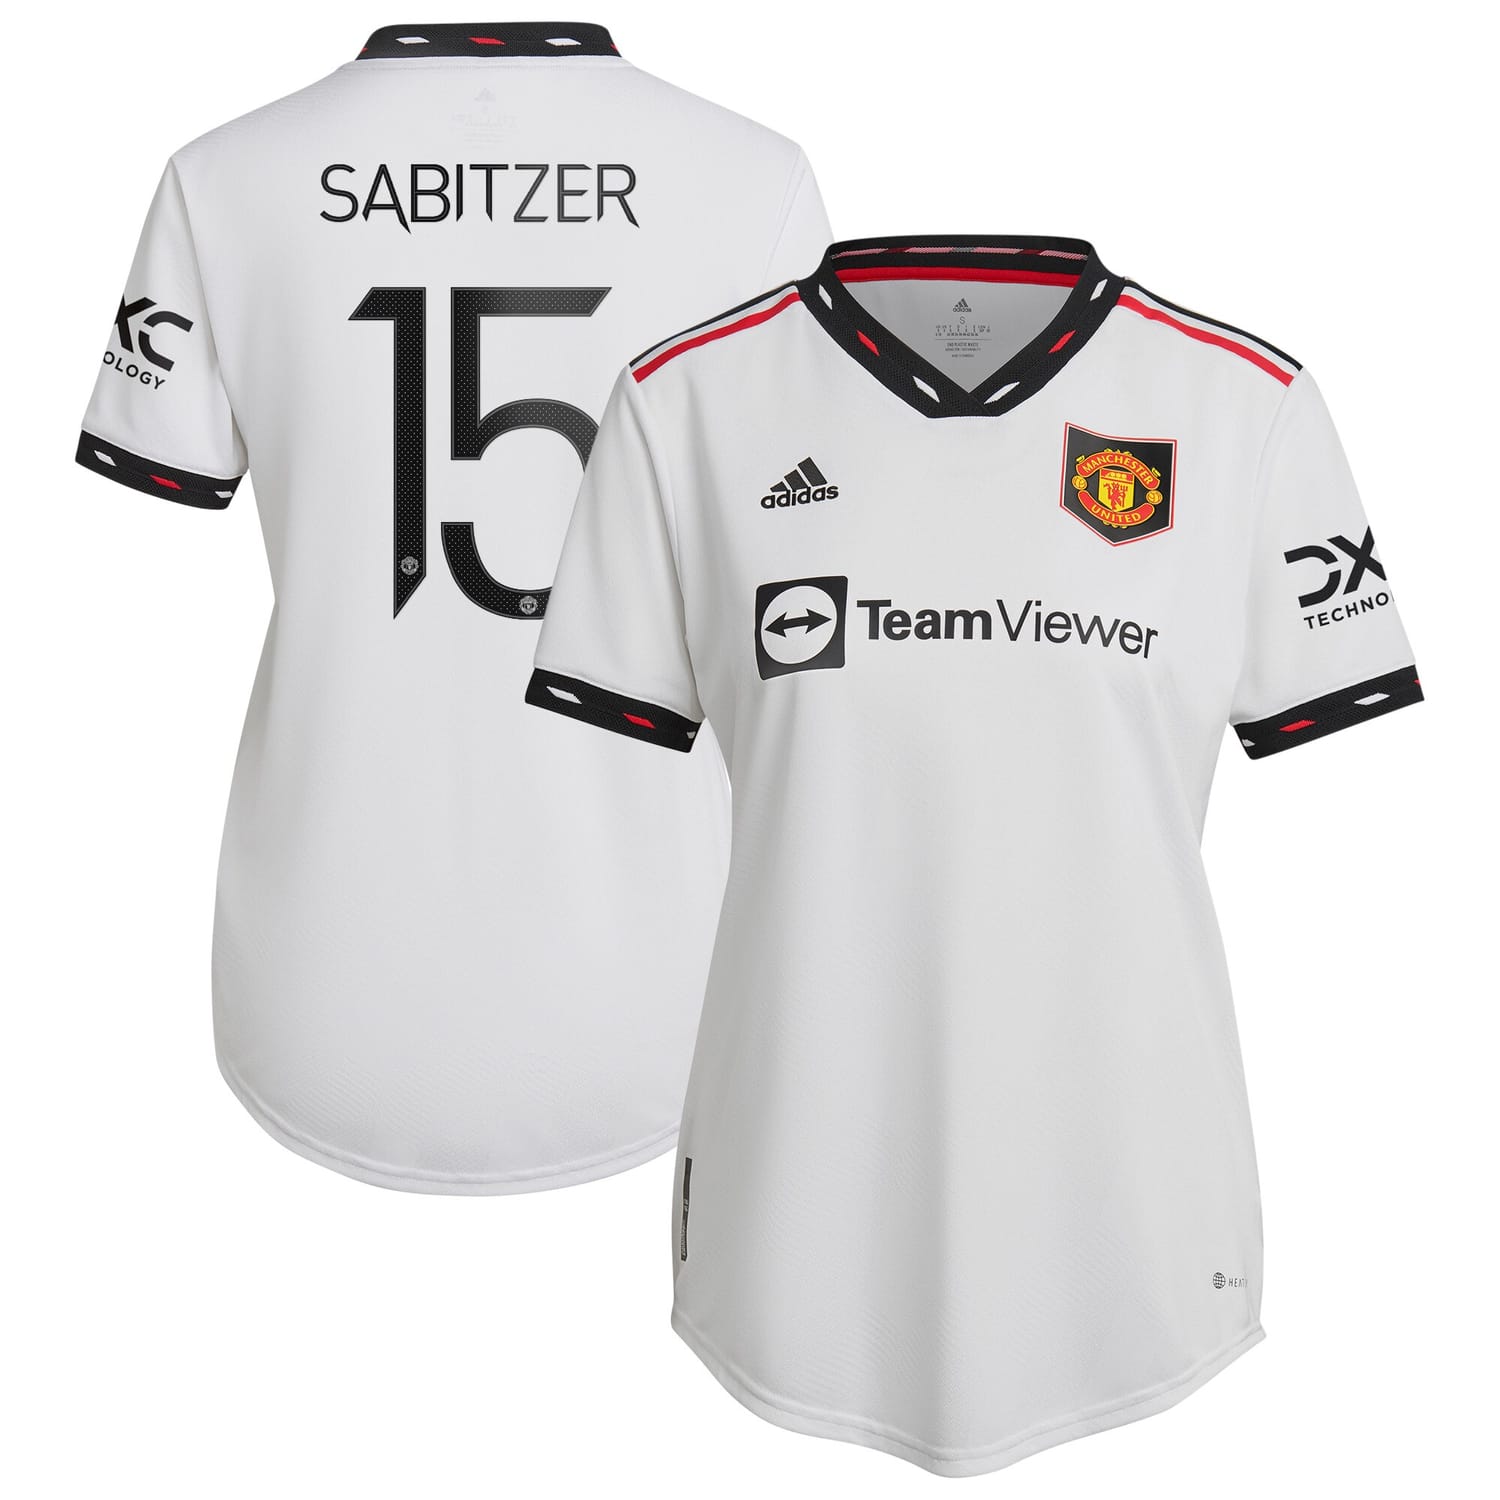 Premier League Manchester United Away Cup Authentic Jersey Shirt 2022-23 player Marcel Sabitzer 15 printing for Women